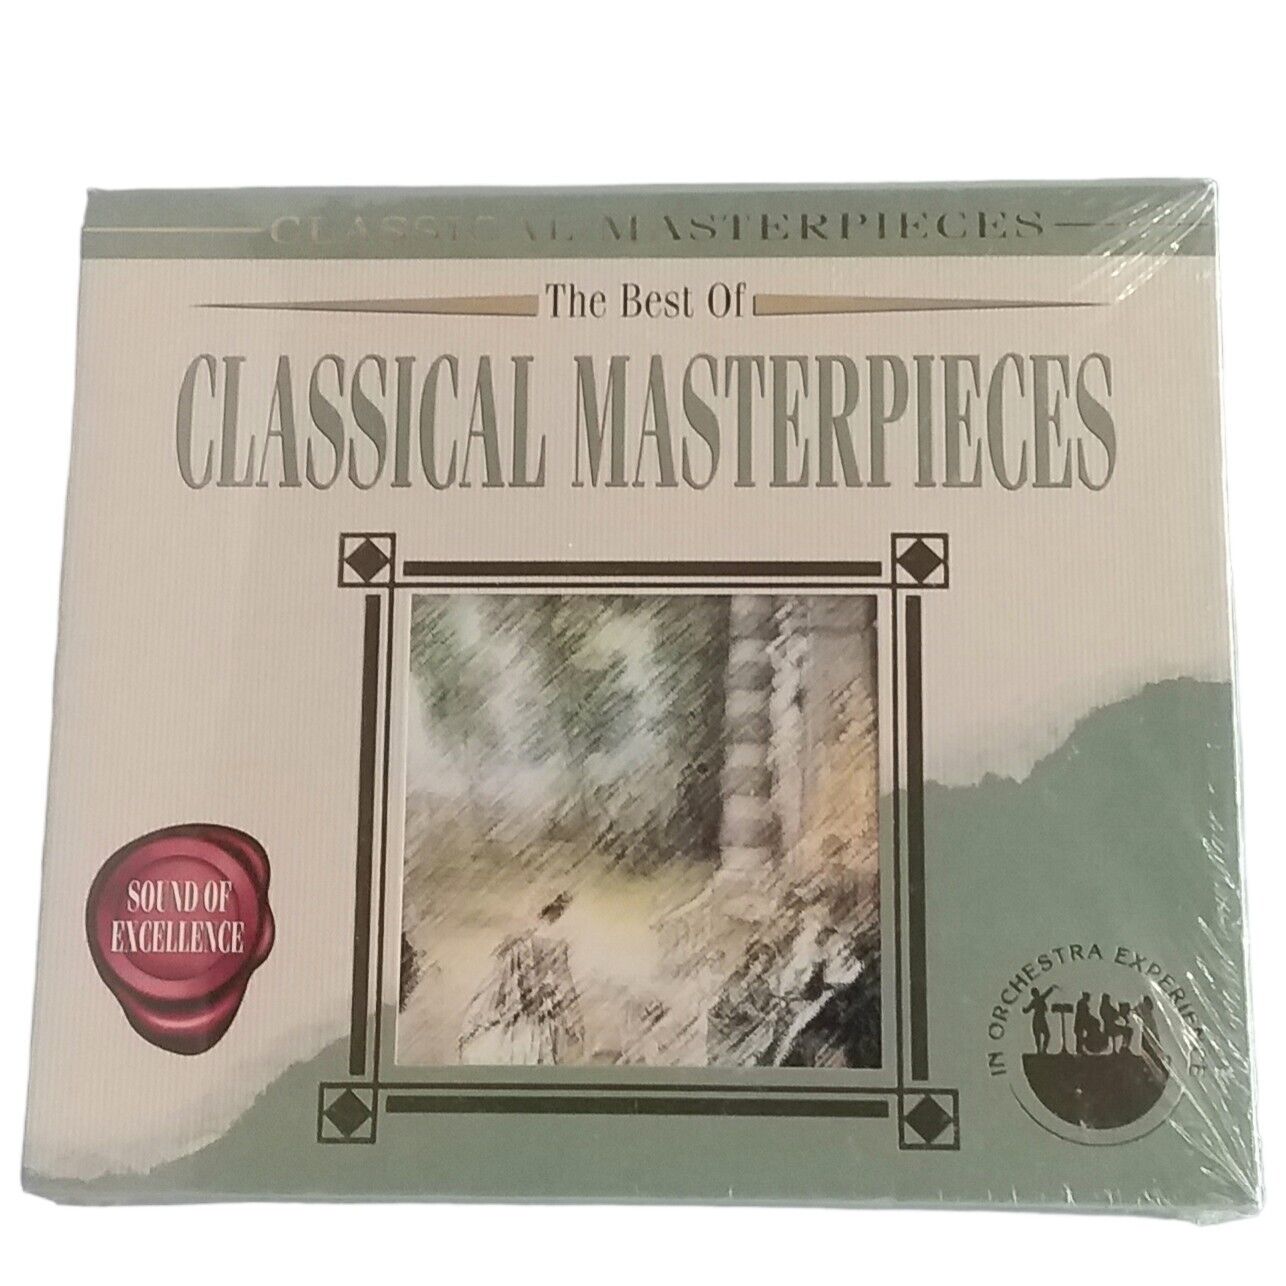 The Best Of Classical Masterpieces CD 1999 An Orchestra Experience New